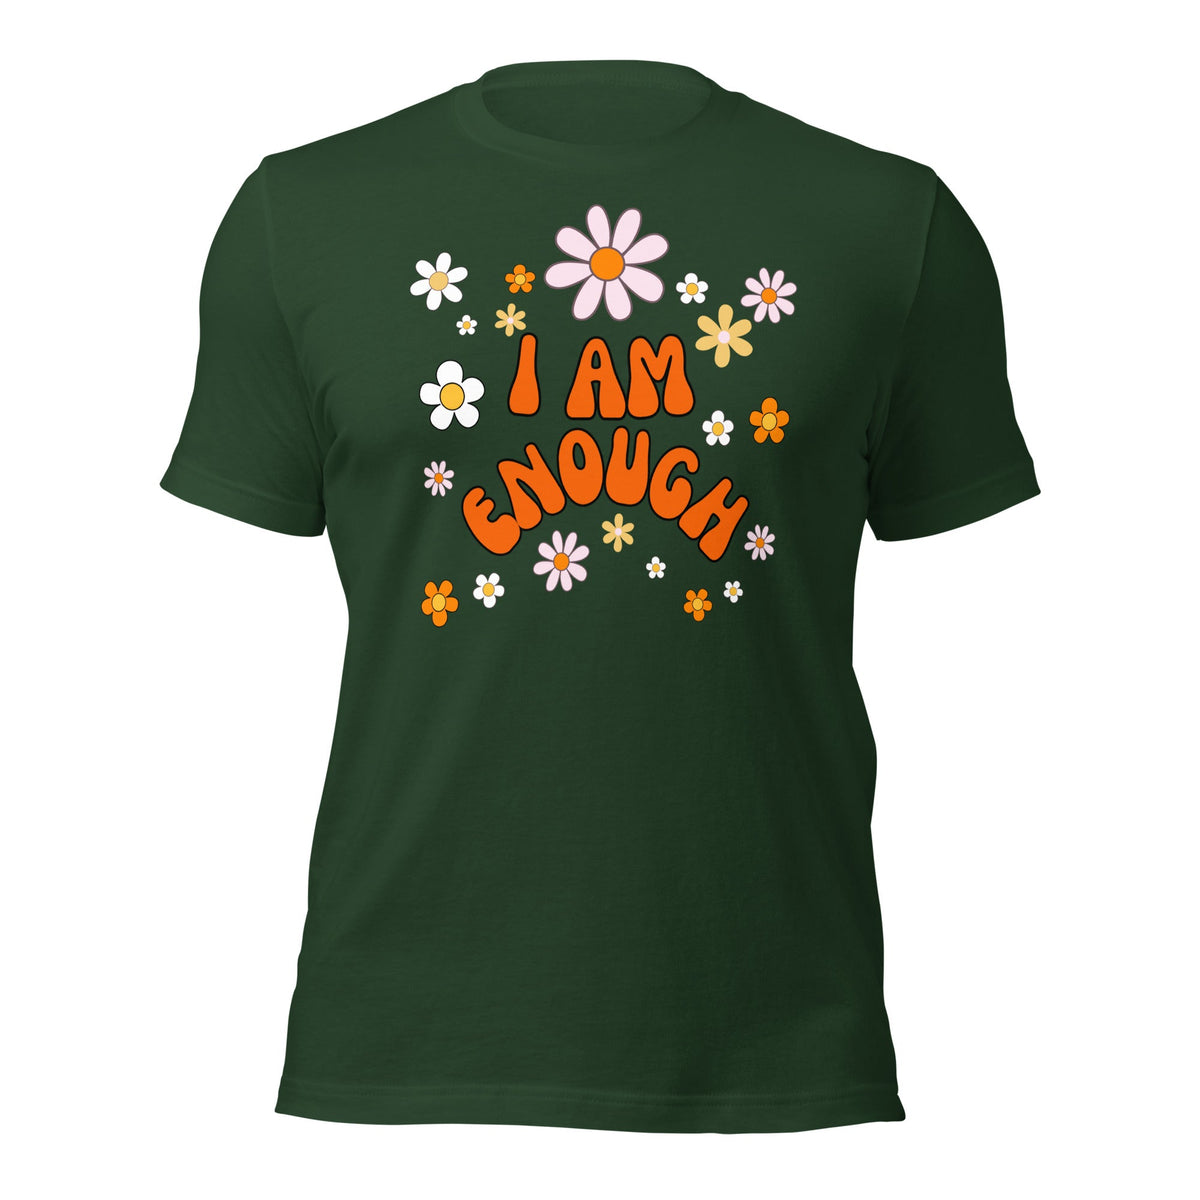 I AM ENOUGH Flower Power Inspirational Affirmation Graphic T-Shirt for Women | I Am Enough Collection